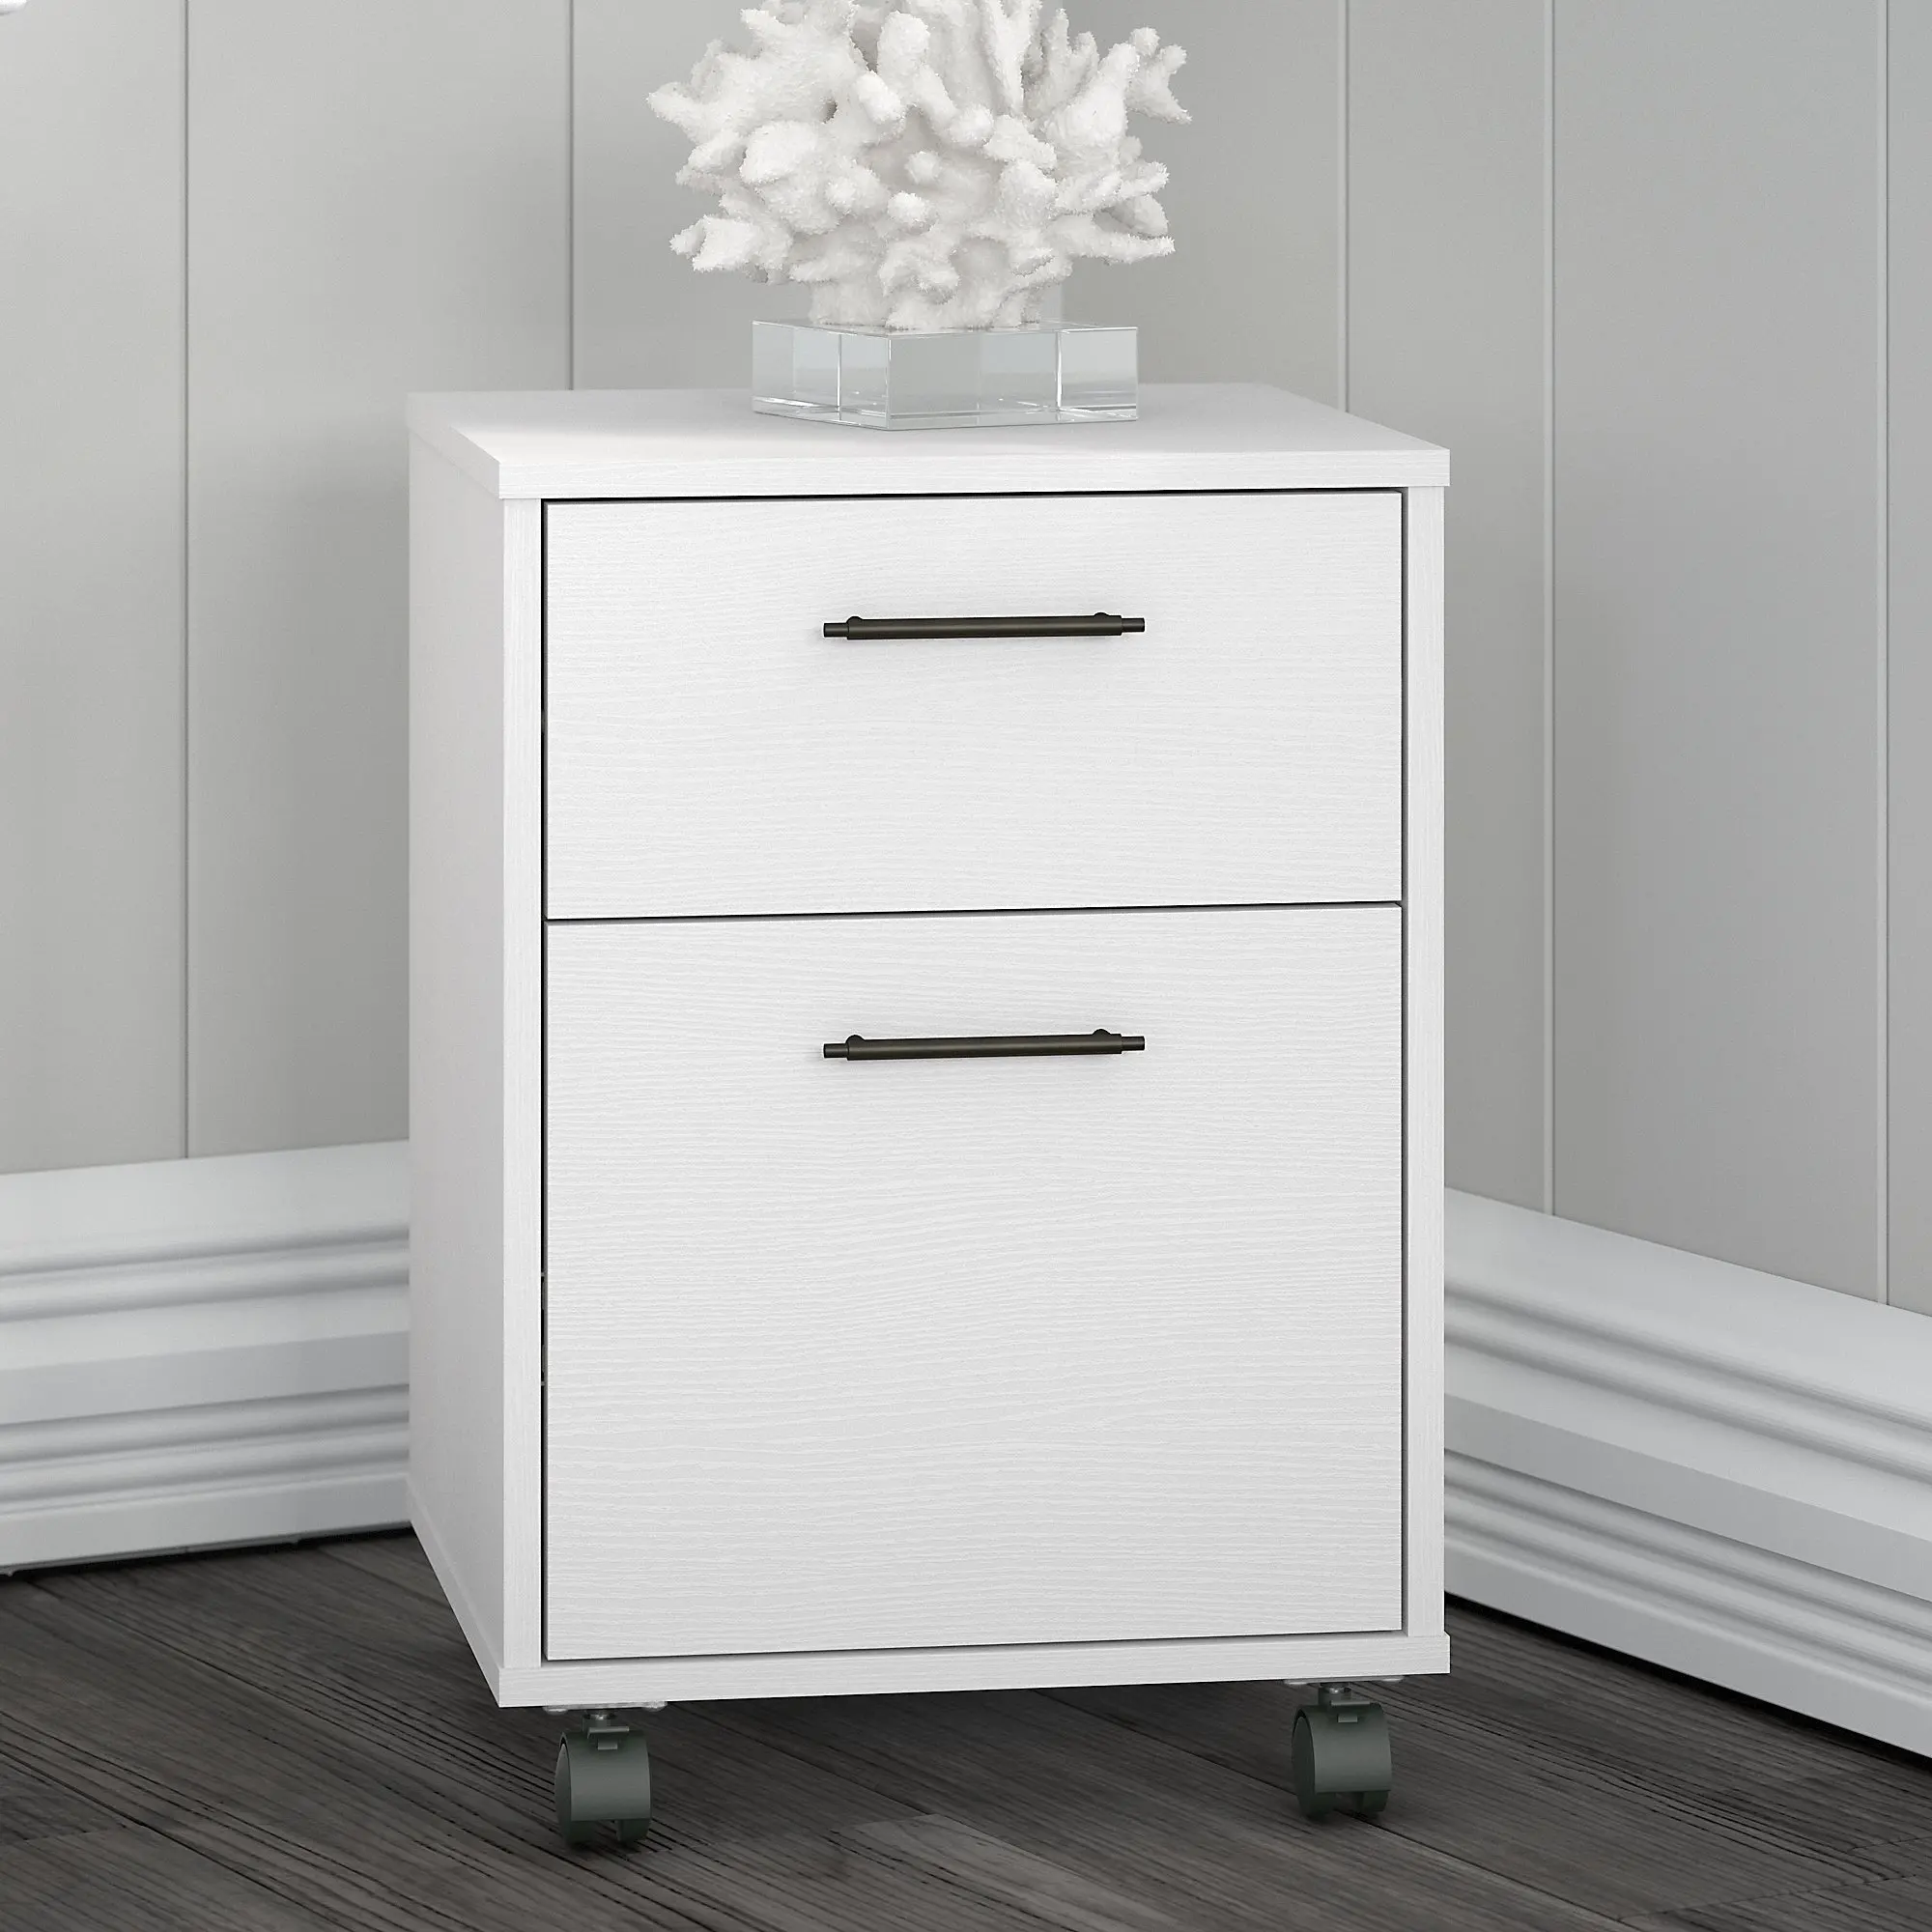  Bush Furniture Key West 2 Drawer Lateral File Cabinet in Washed  Gray, Document Storage for Home Office